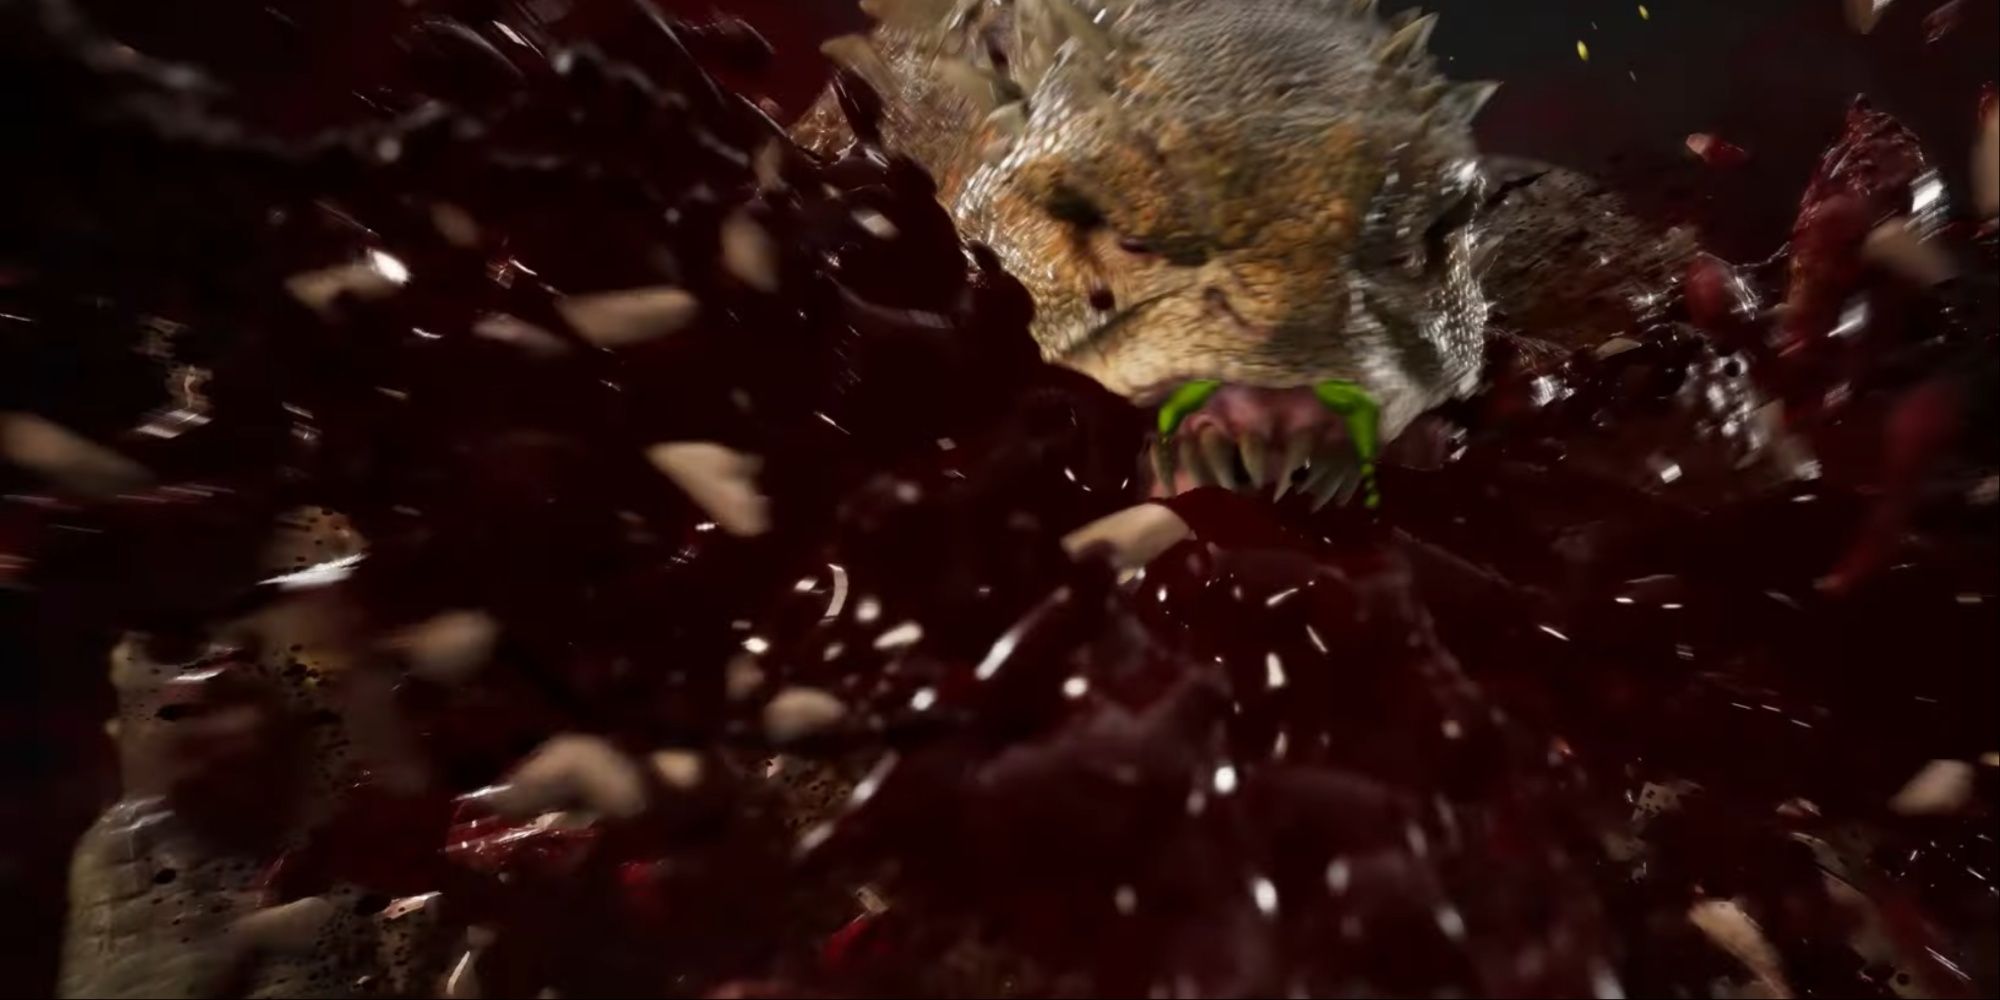 Reptile chomping on an opponent's head as a large splatter of blood and chunks hit the camera.